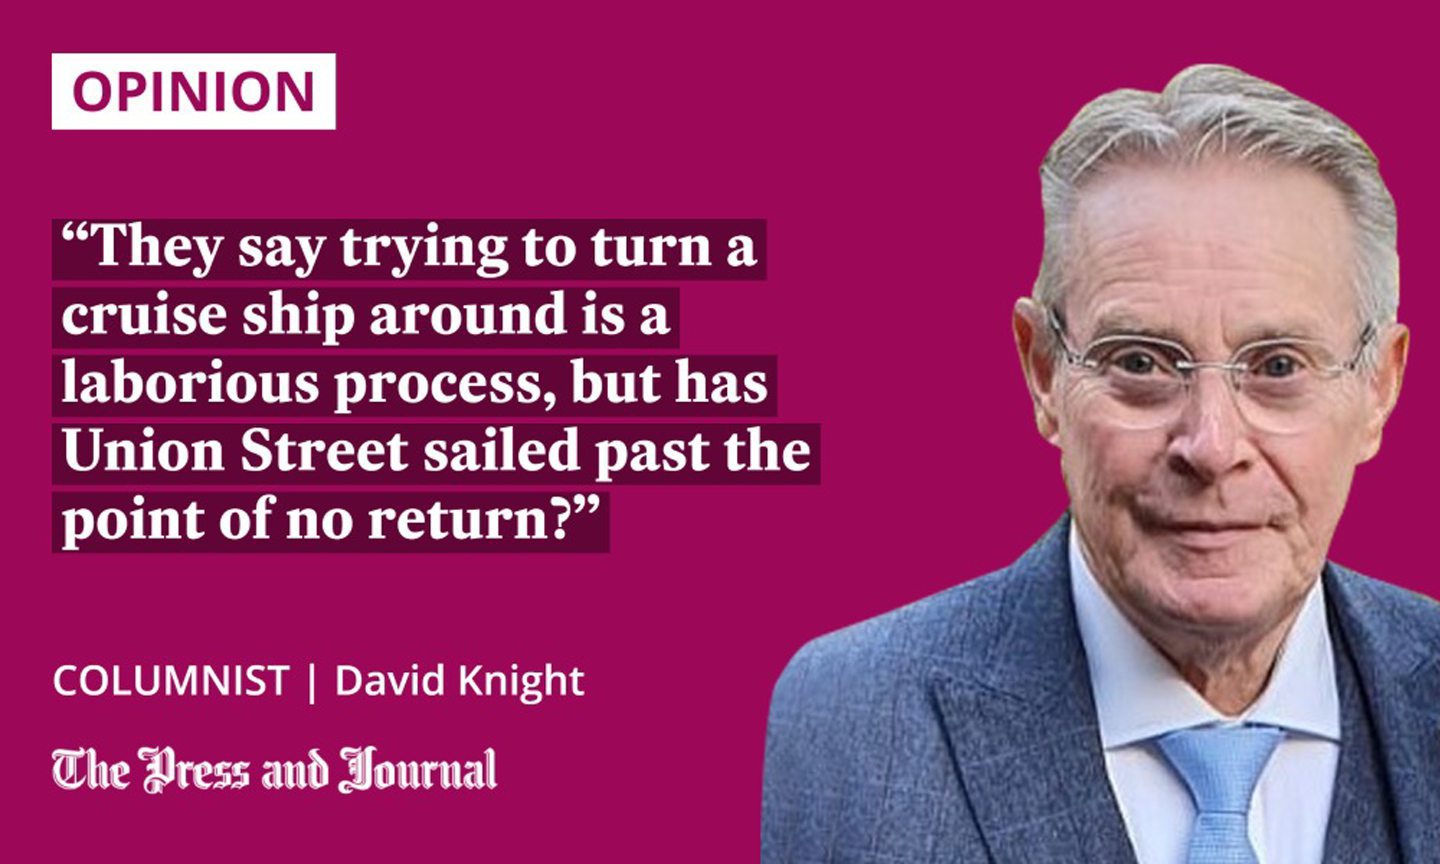 Quotation from columnist David Knight: "They say trying to turn a cruise ship around is a laborious process, but has Union Street sailed past the point of no return?"